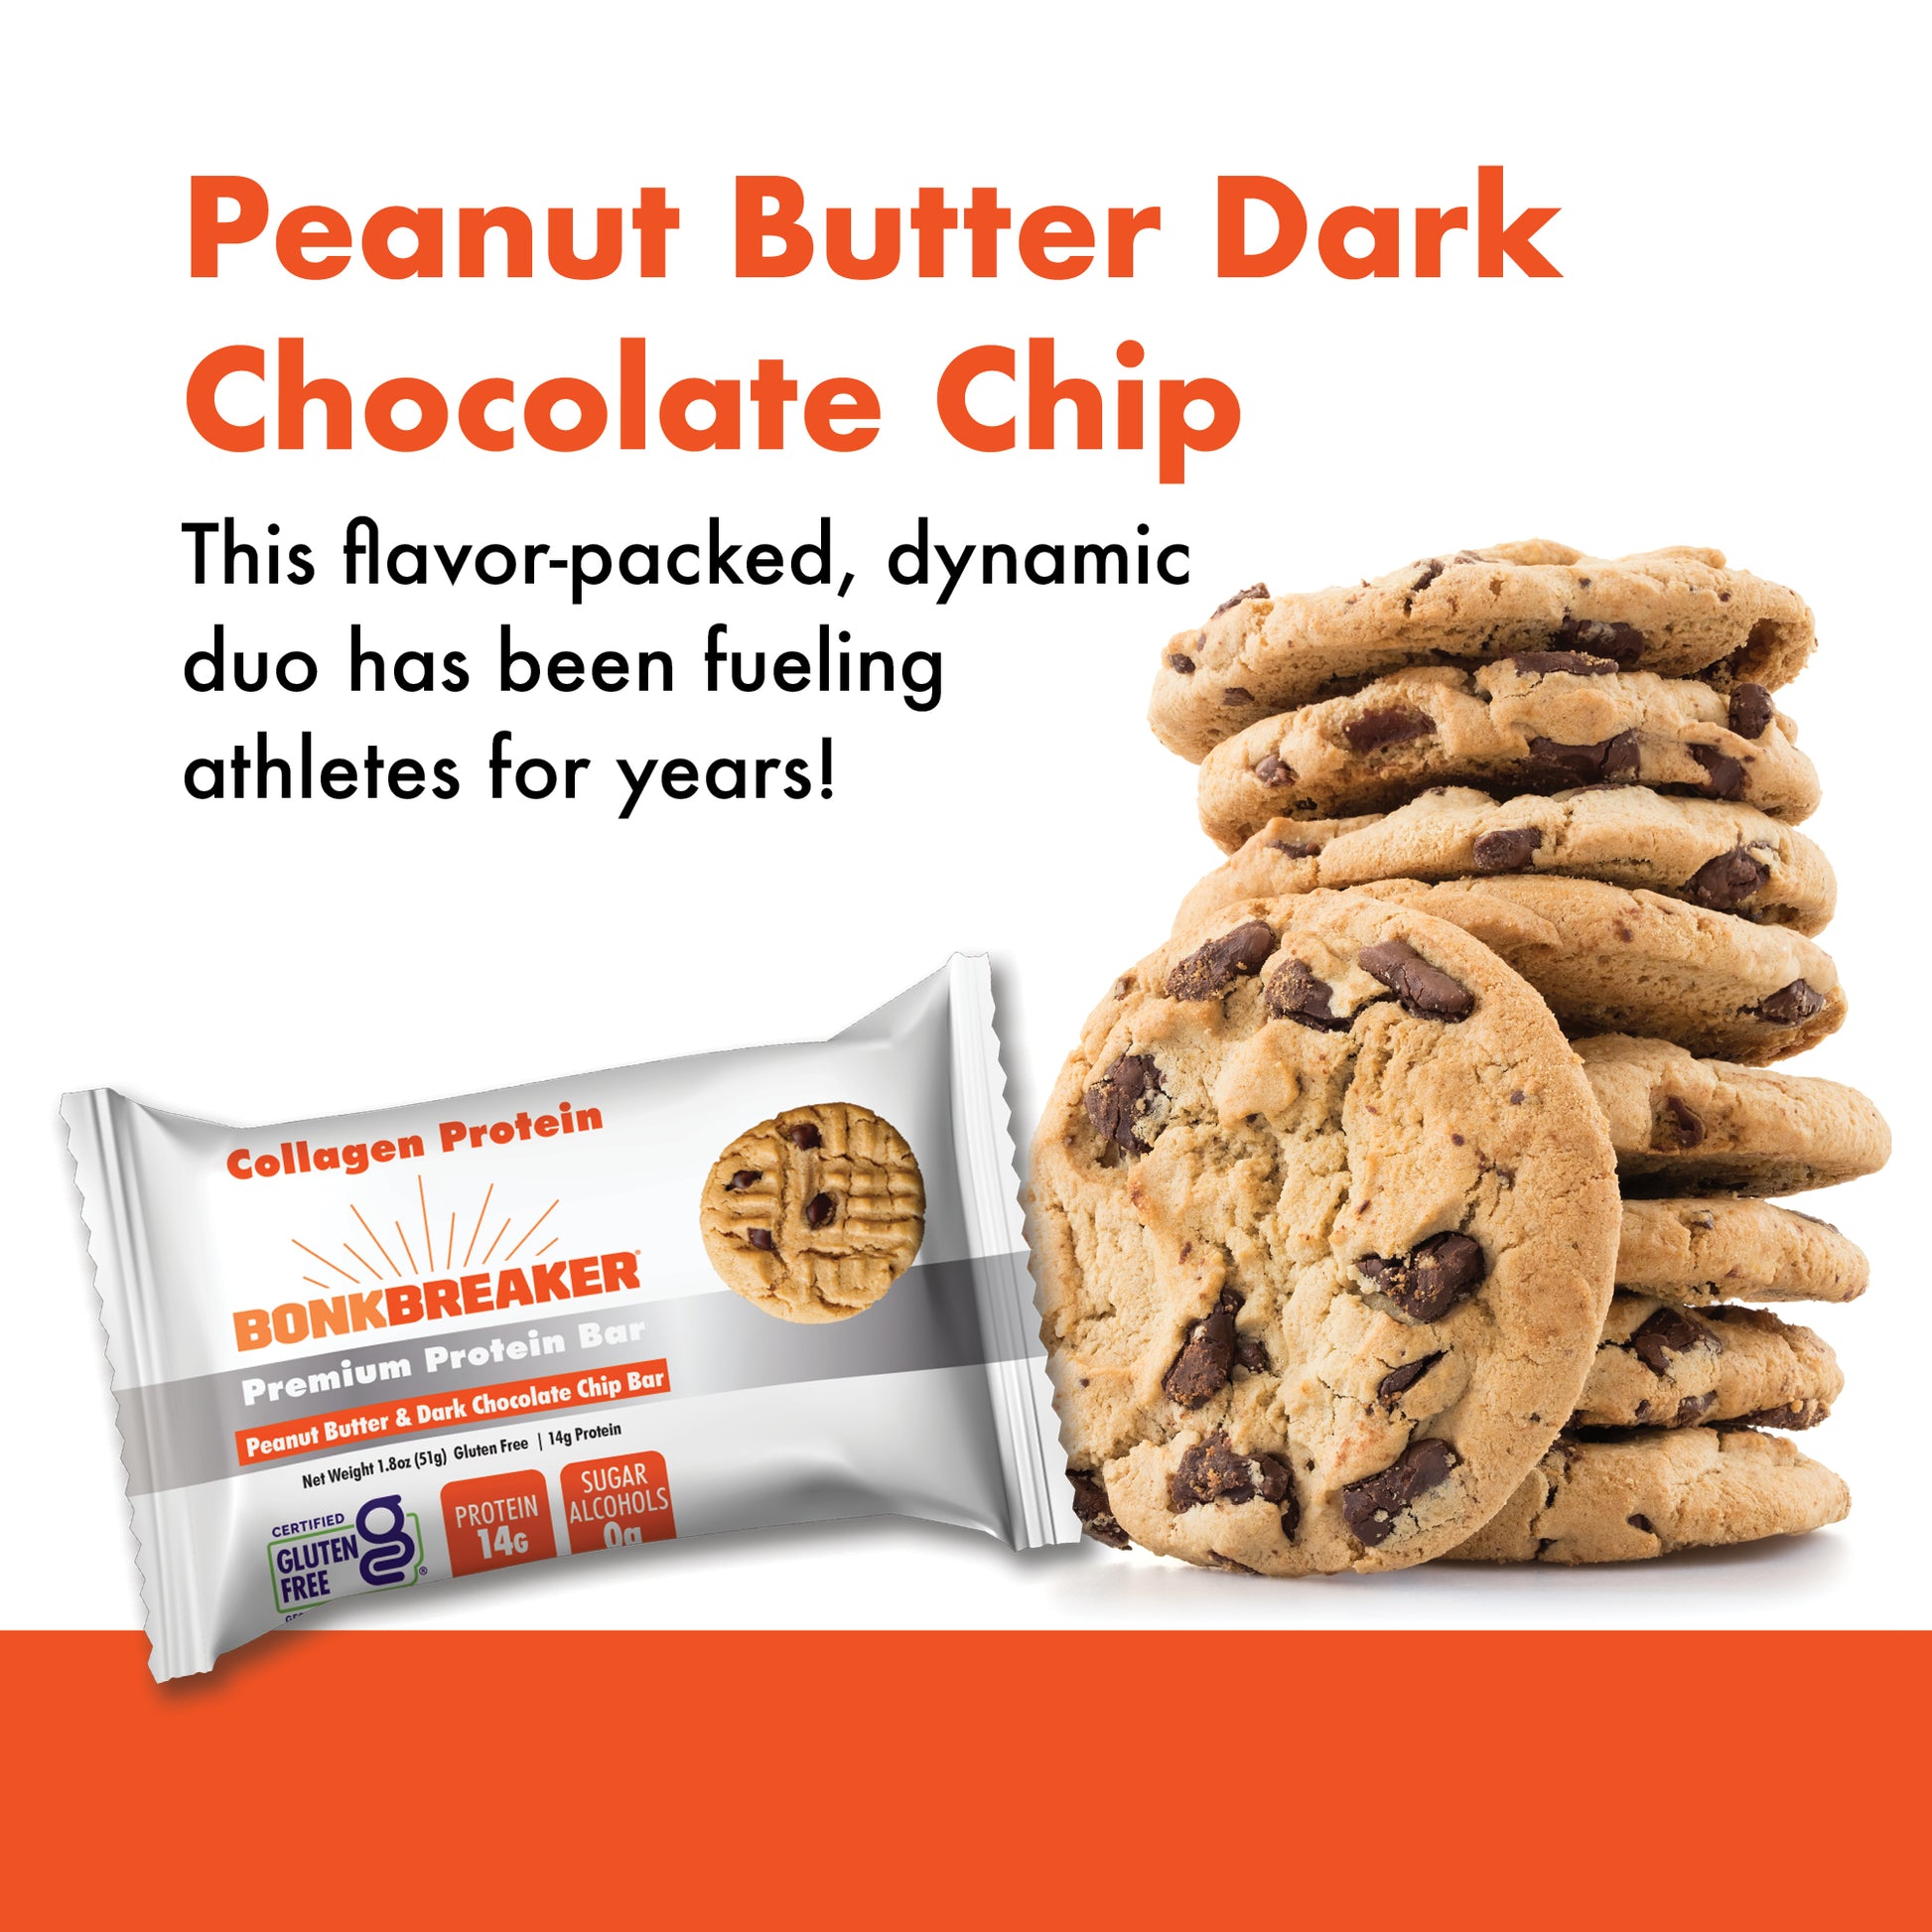 Peanut Butter Dark Chocolate Chip - This flavor-packed, dynamic duo has been fueling athletes for years.